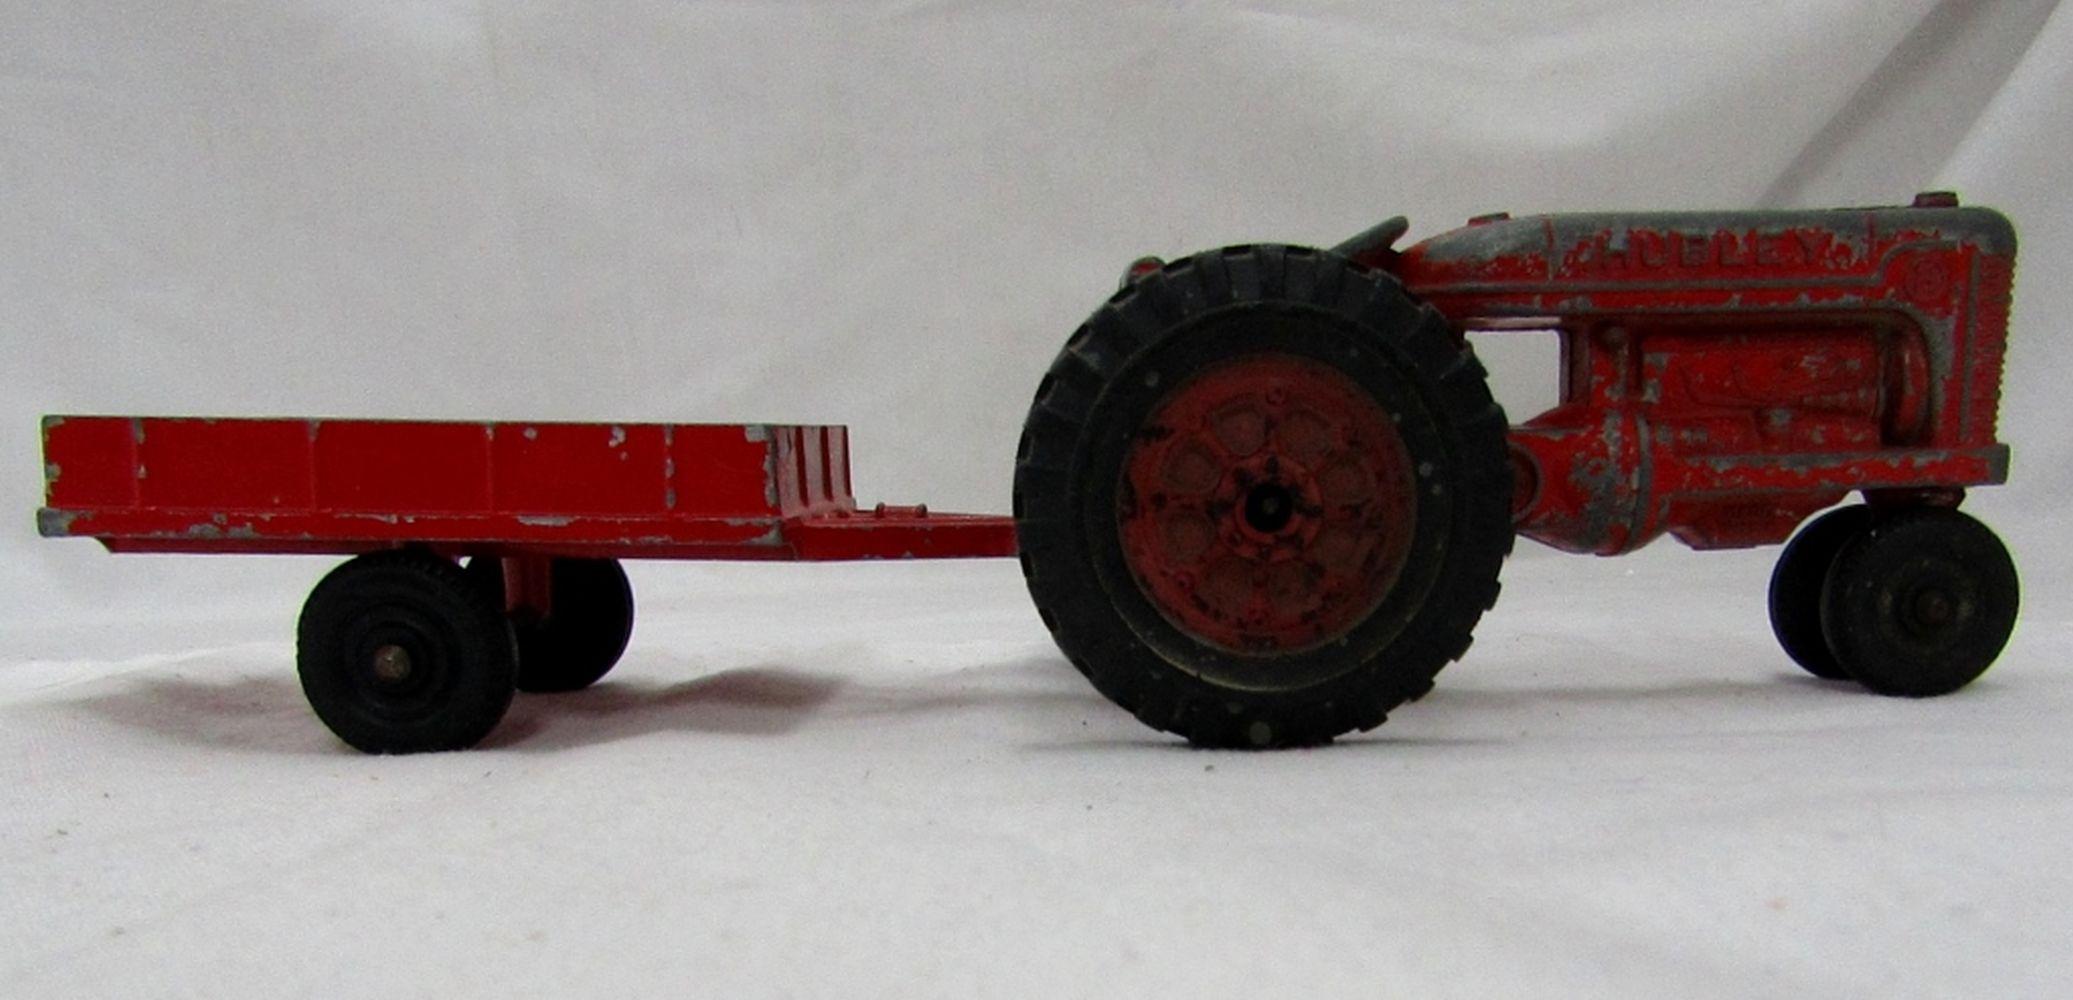 VINTAGE HUBLEY KIDDIE TOY FARM TRACTOR AND TRAILER